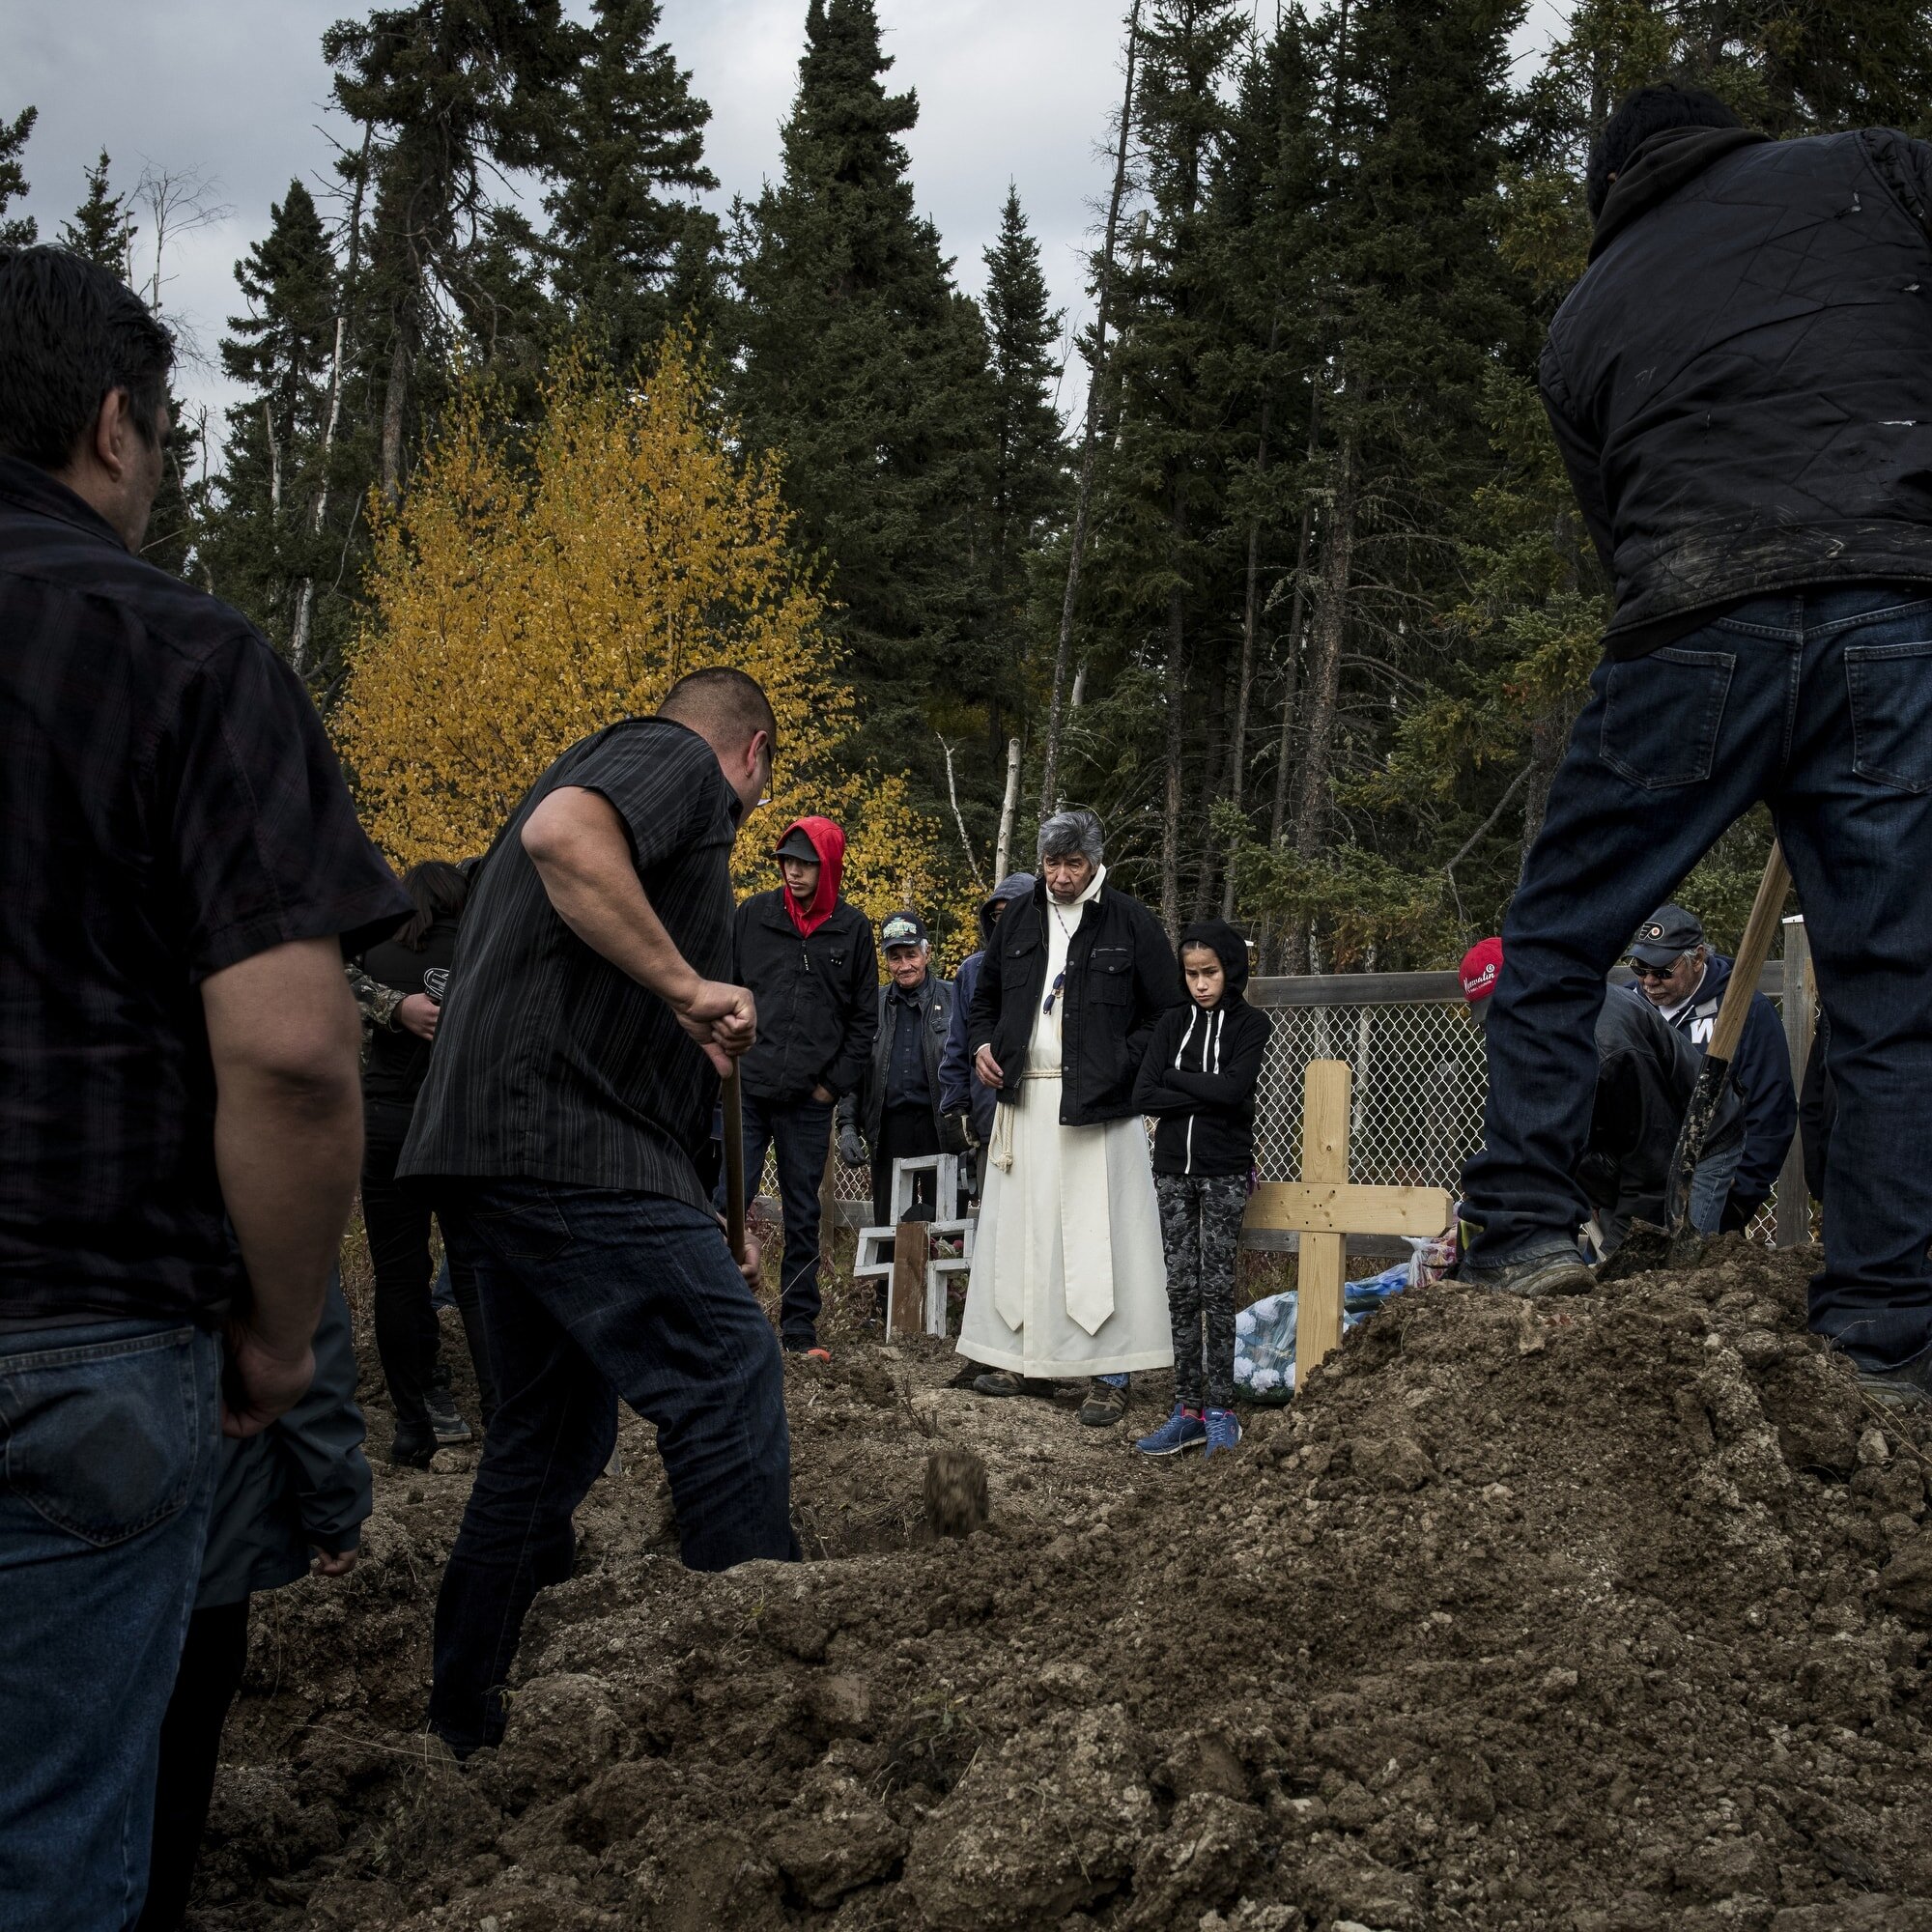 Father Kennith Kitchekeesik administers a funeral in Split Lake. The banks of the cemetery have been reinforced by riprap to prevent erosion after human remains were found exposed. “Skull and bones are starting to pop out here and there along the ba…